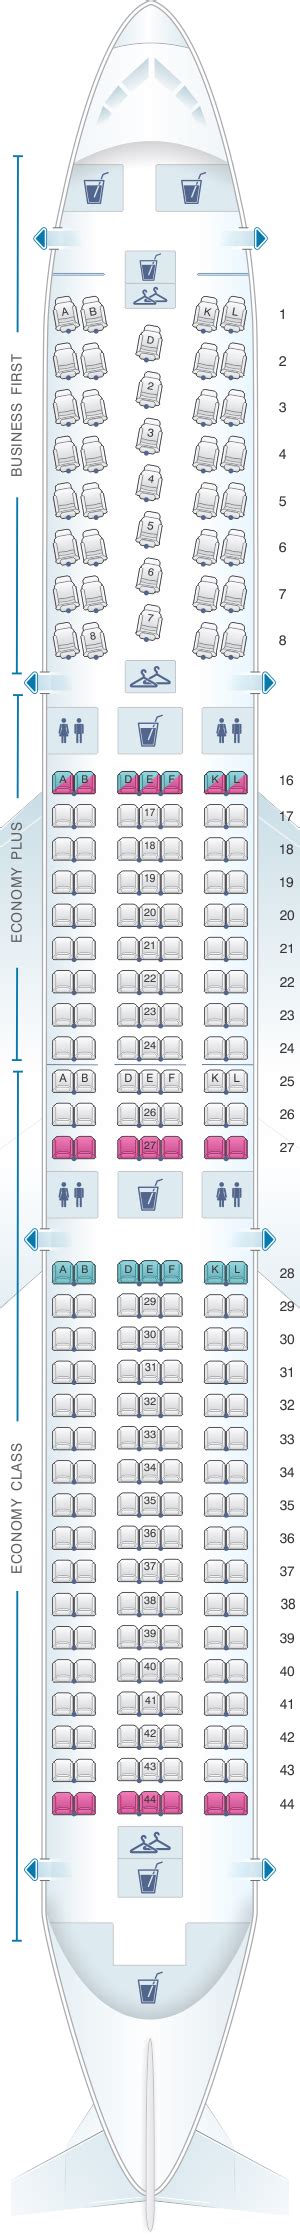 United Airlines Seating Chart Image